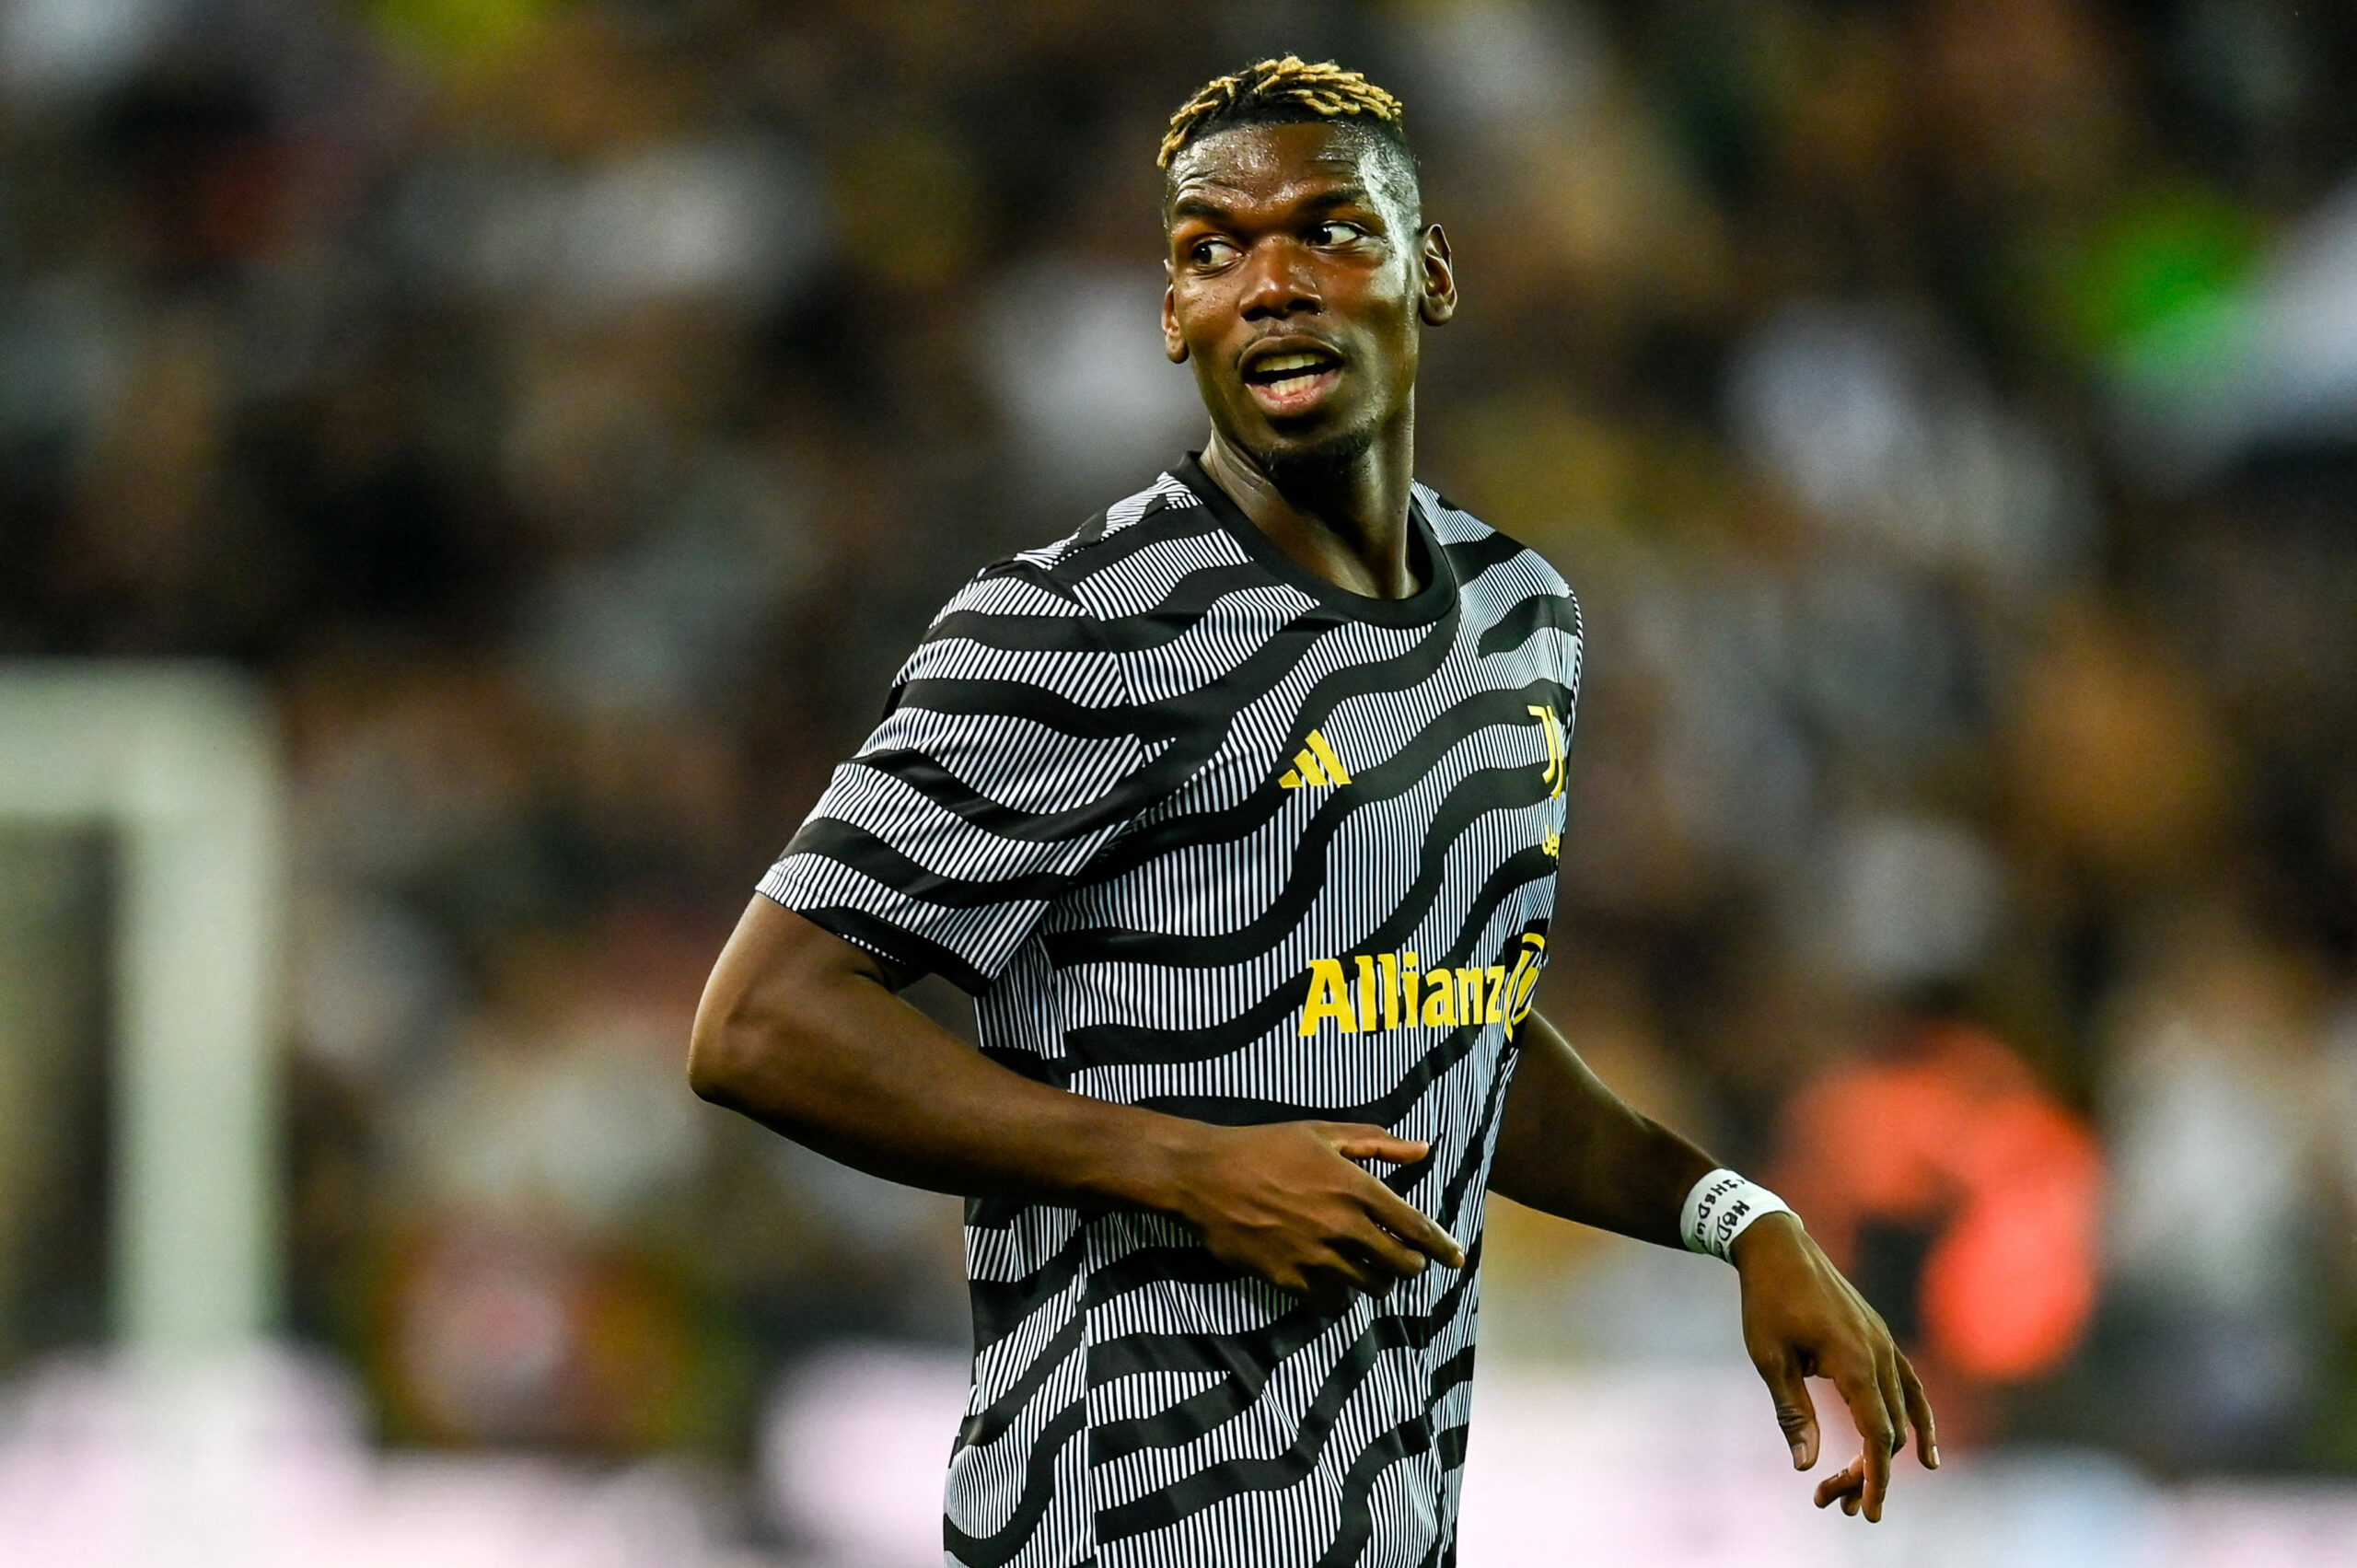 Paul Pogba and 4 More Major Footballers Who Have Been Banned for Doping